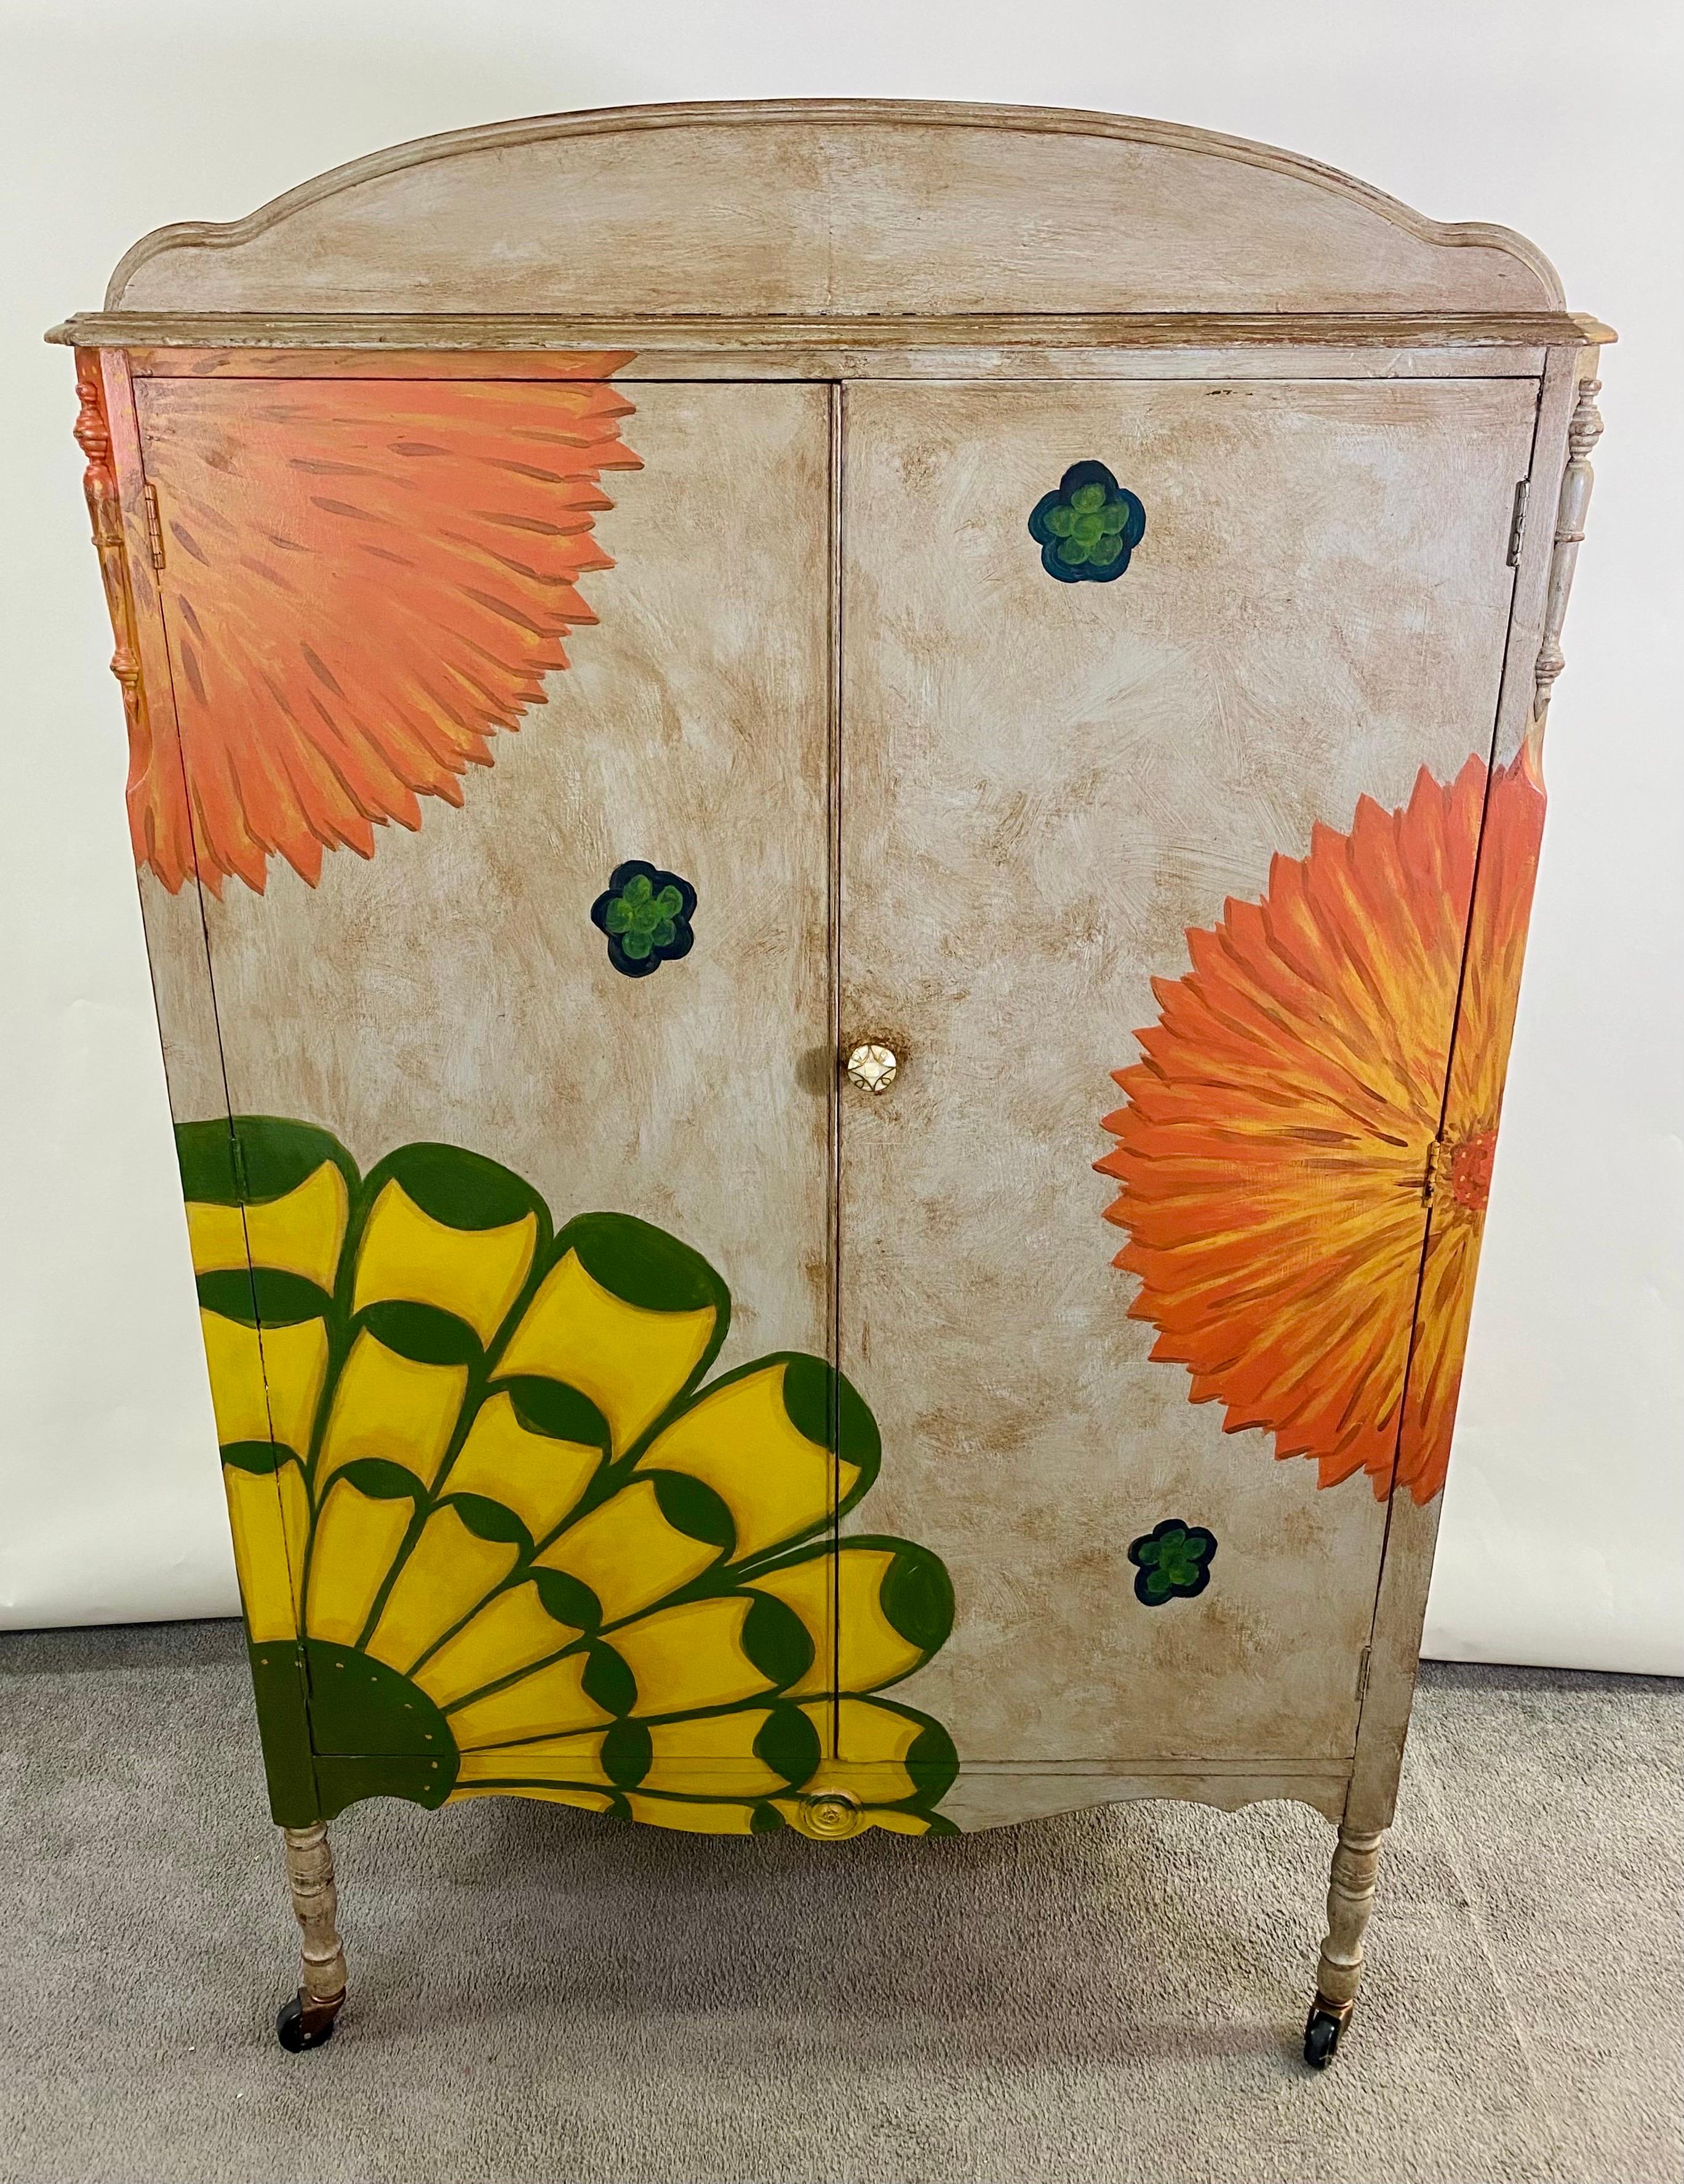 A whimsical boho chic armoire or wardrobe hand-painted in beige with orange , green and yellow flowers motifs on beige background. The armoire is standing on 4 wheeled legs allowing mobility to move and use easily in your space. The inside of the